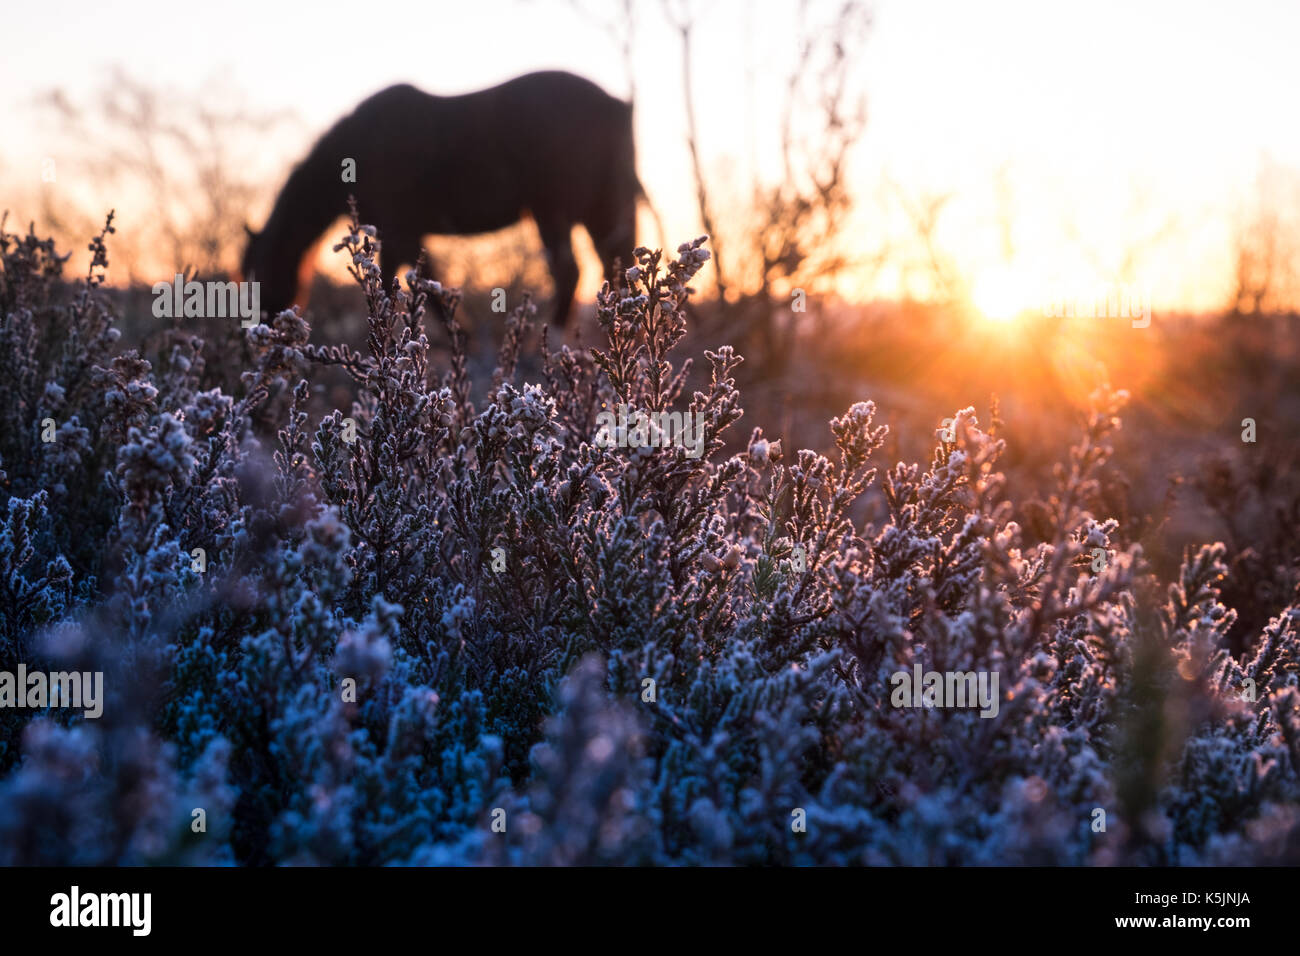 A horse grazing on Heather at sunrise over heather in the New Forest National Park, UK Stock Photo